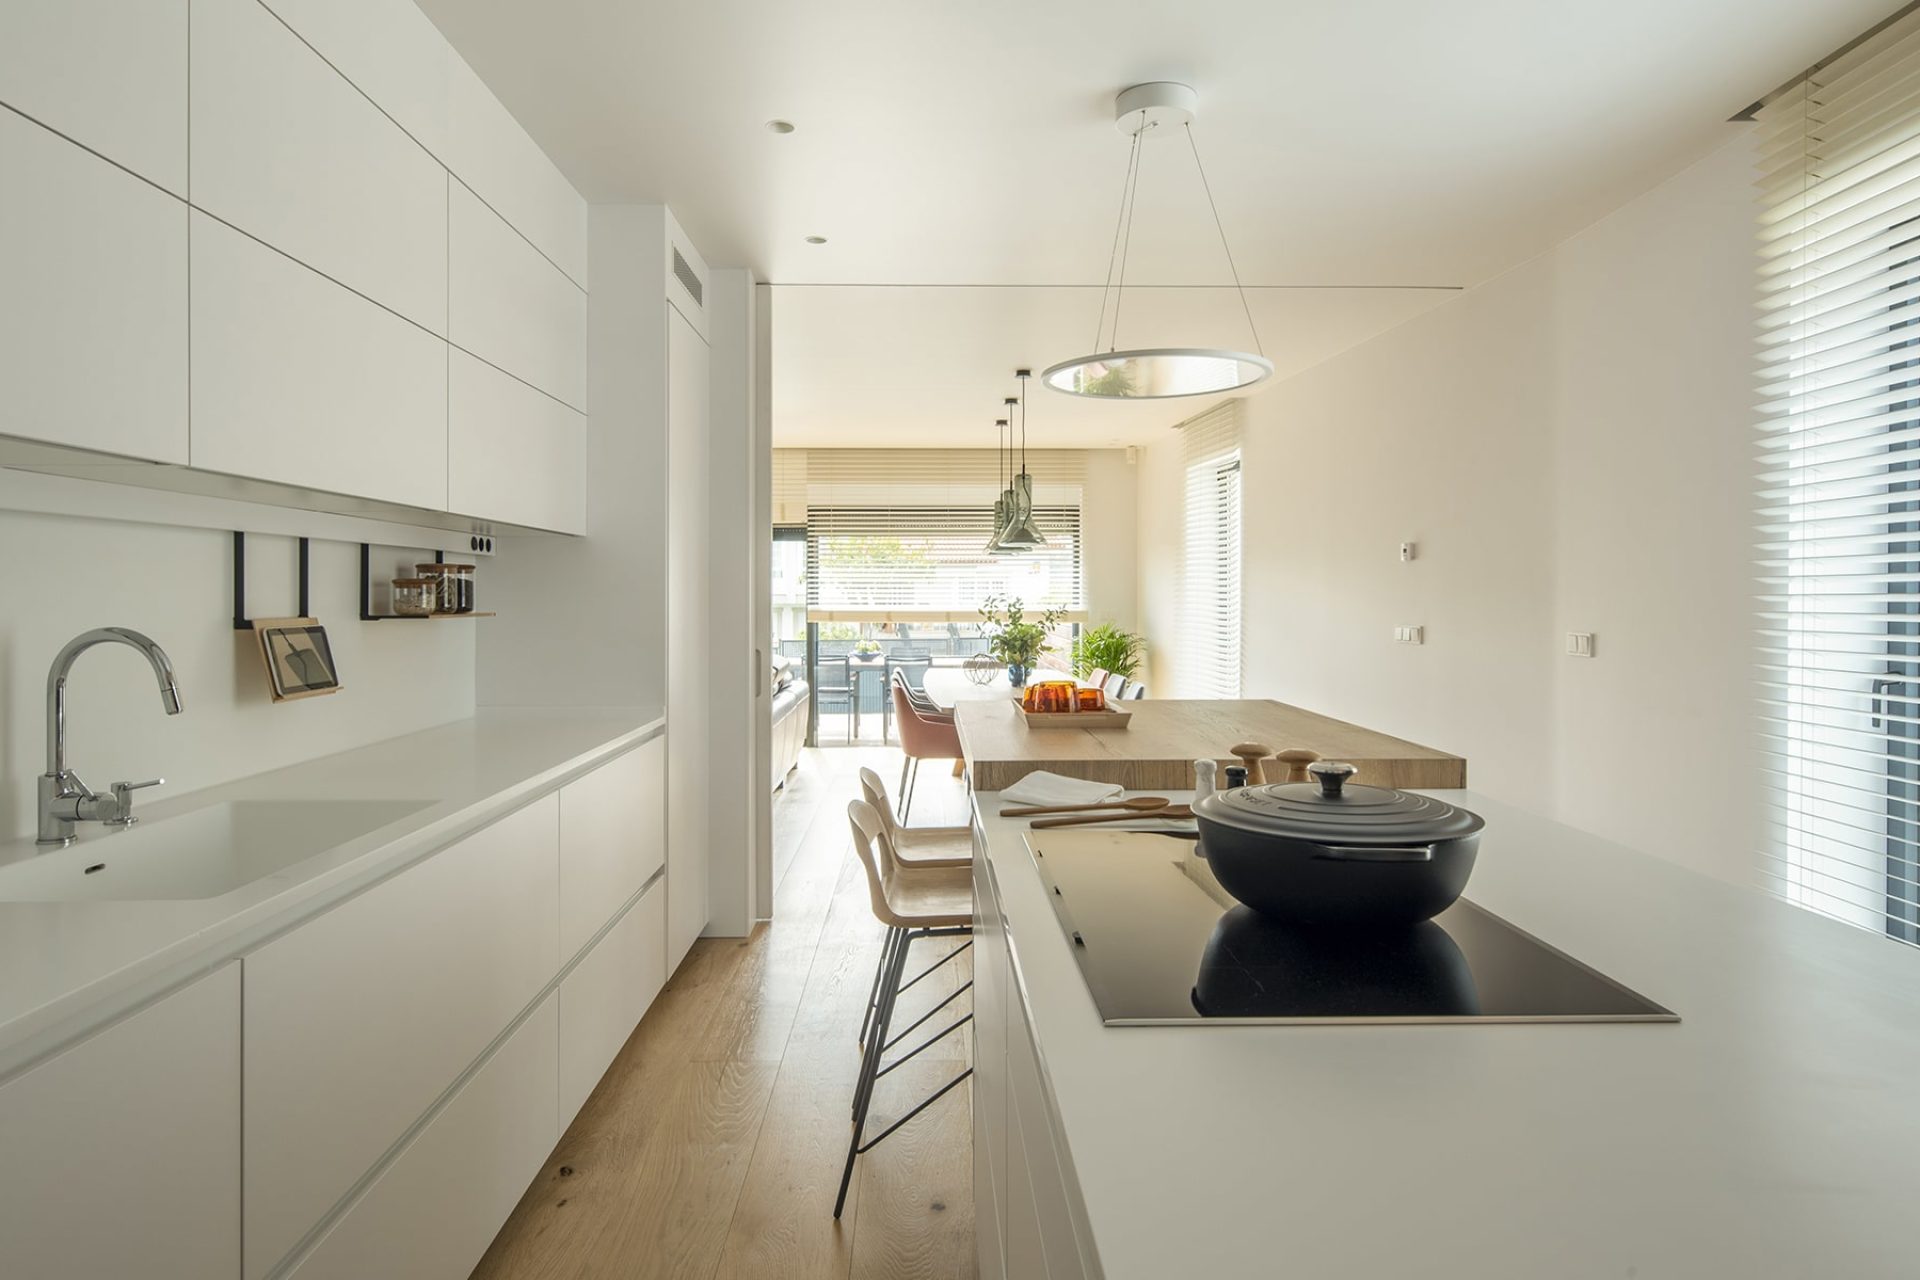 Open-plan white kitchen inspiration with island and built-in eating area